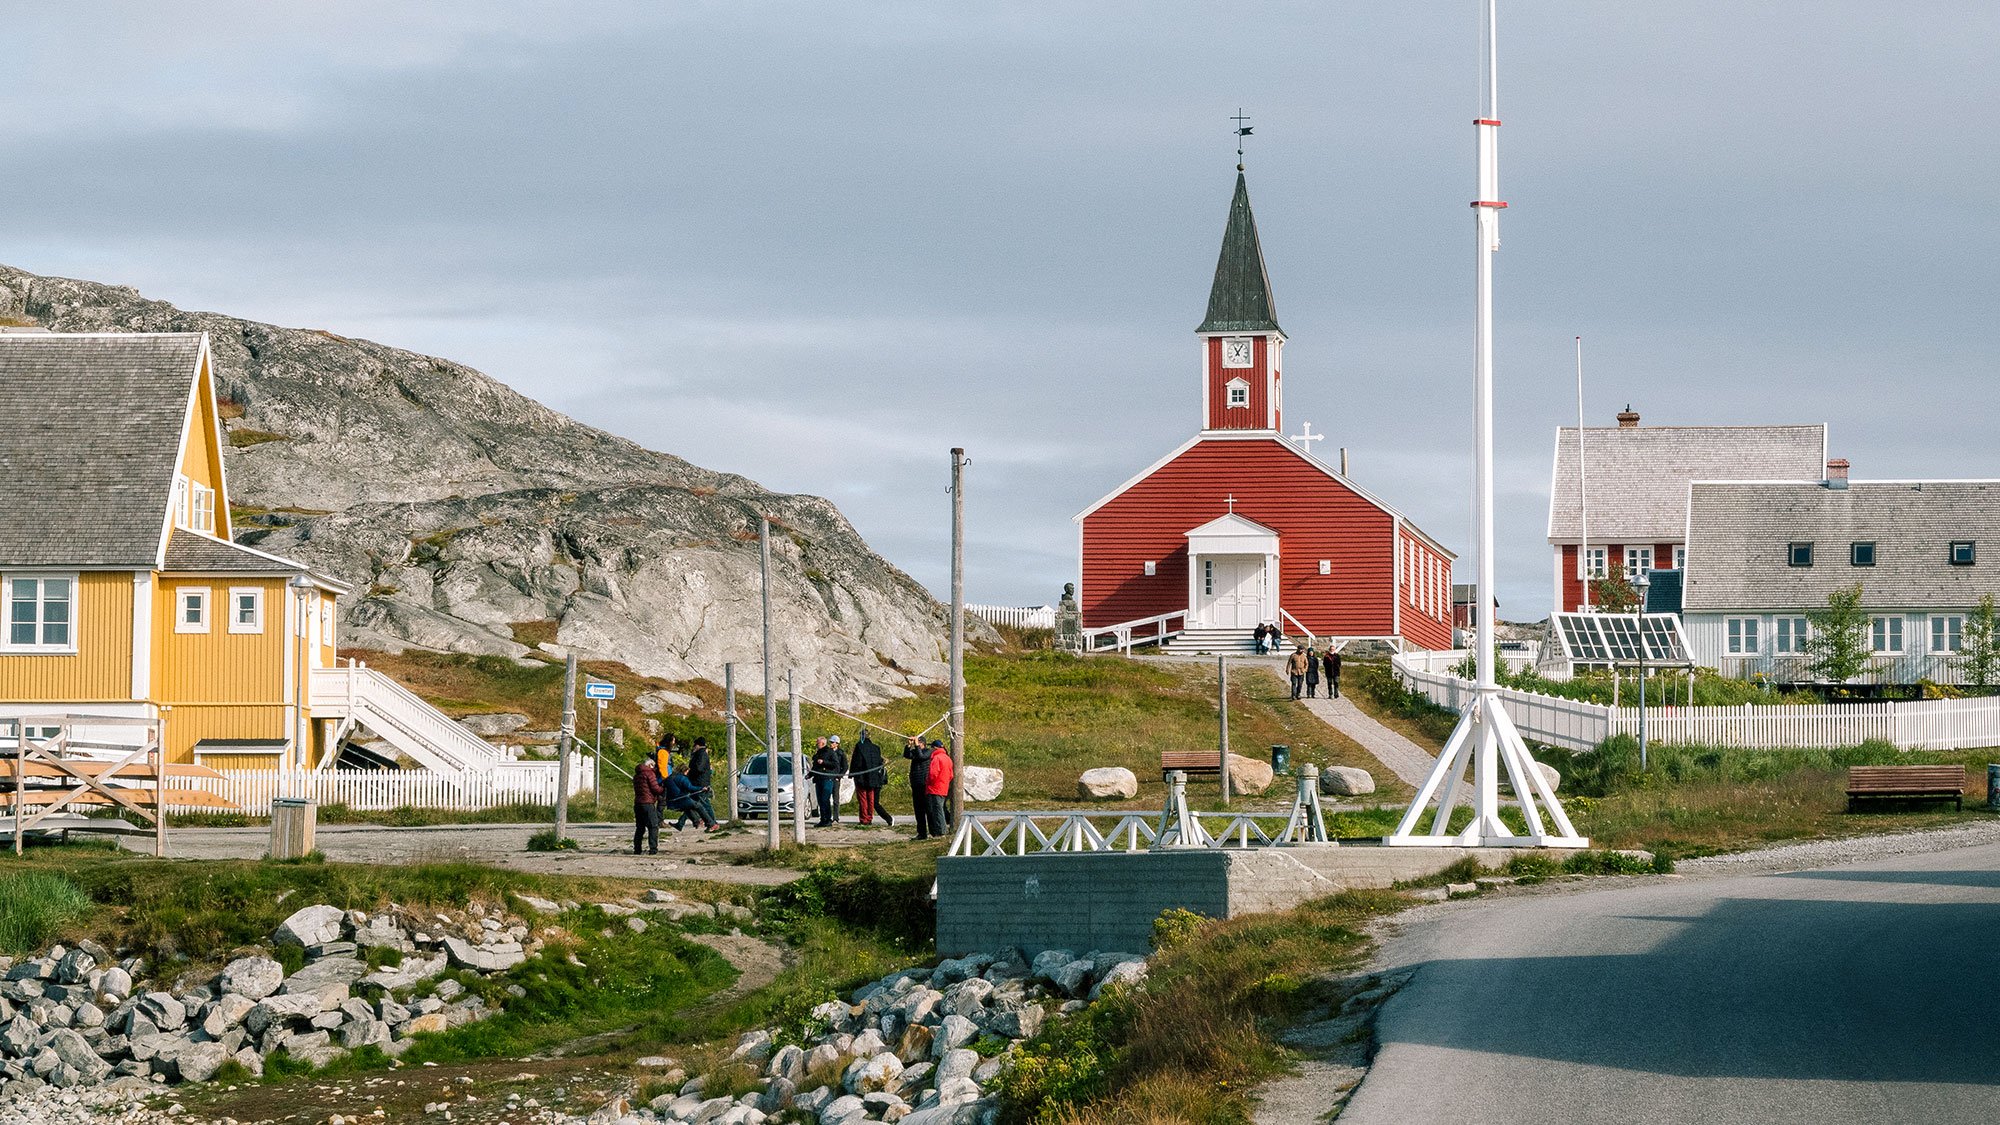 Visitors can explore the colourful buildings in Nuuk, the capital of Greenland 